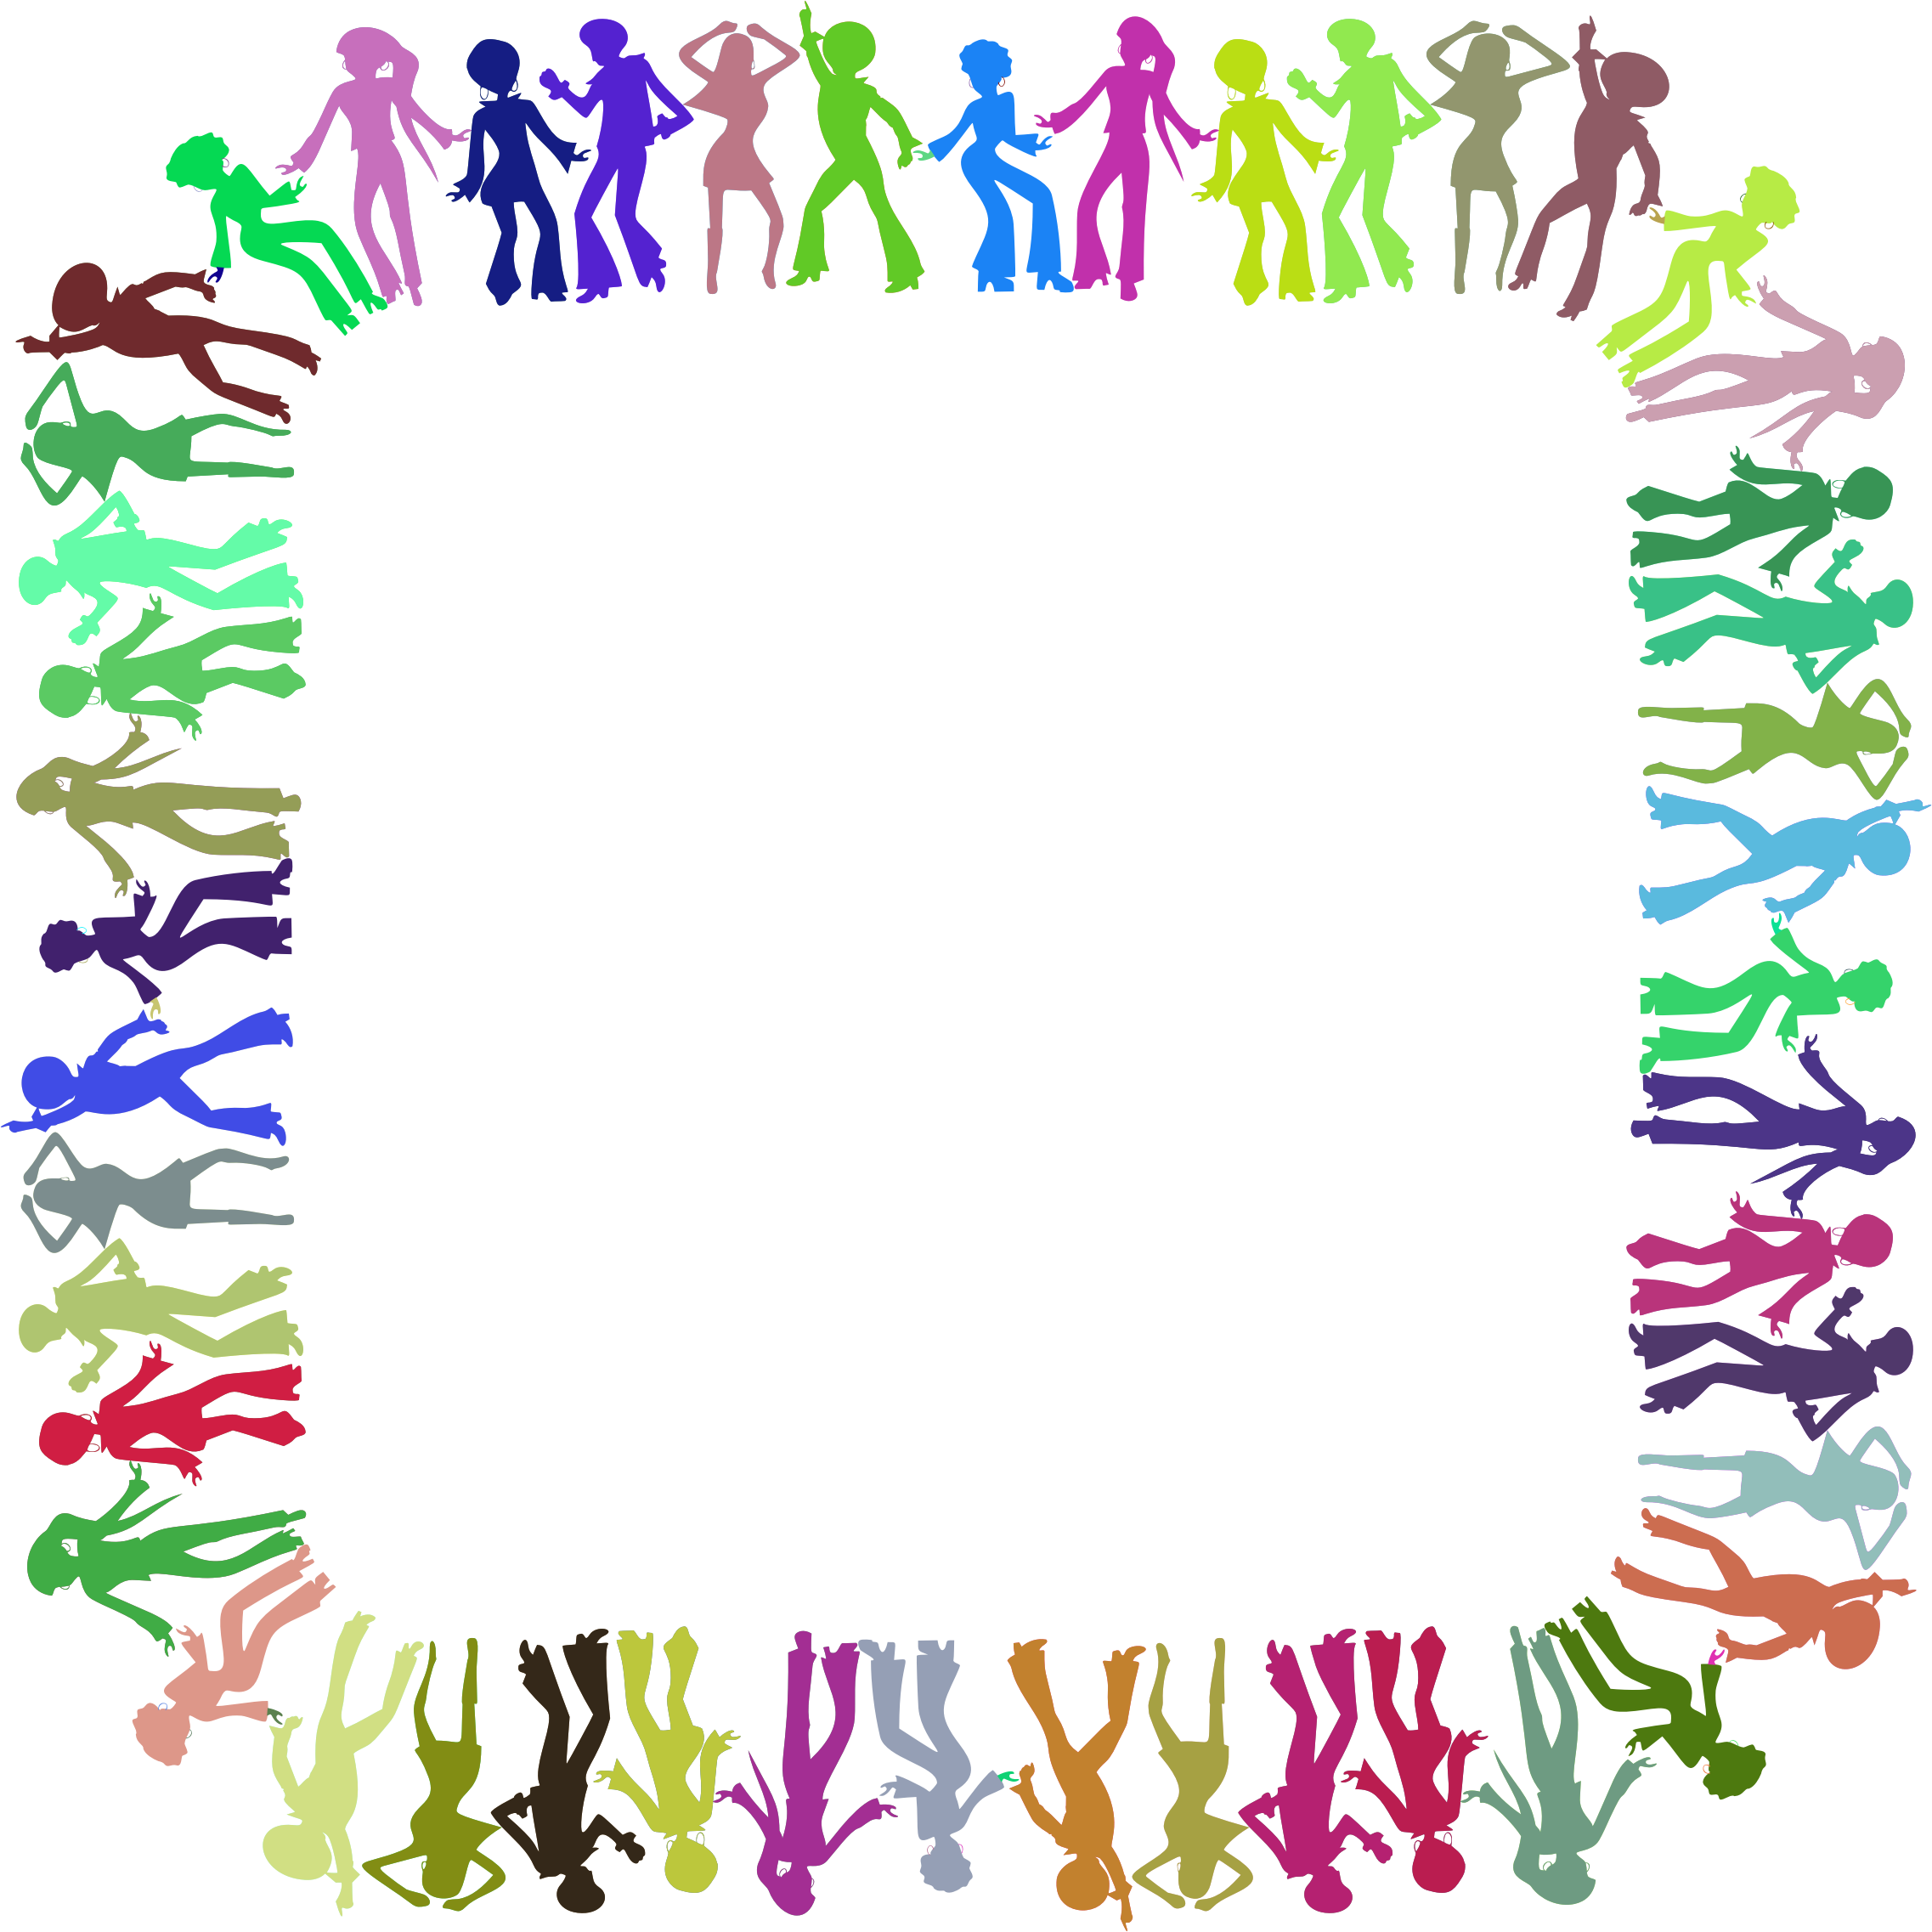 disco clipart people